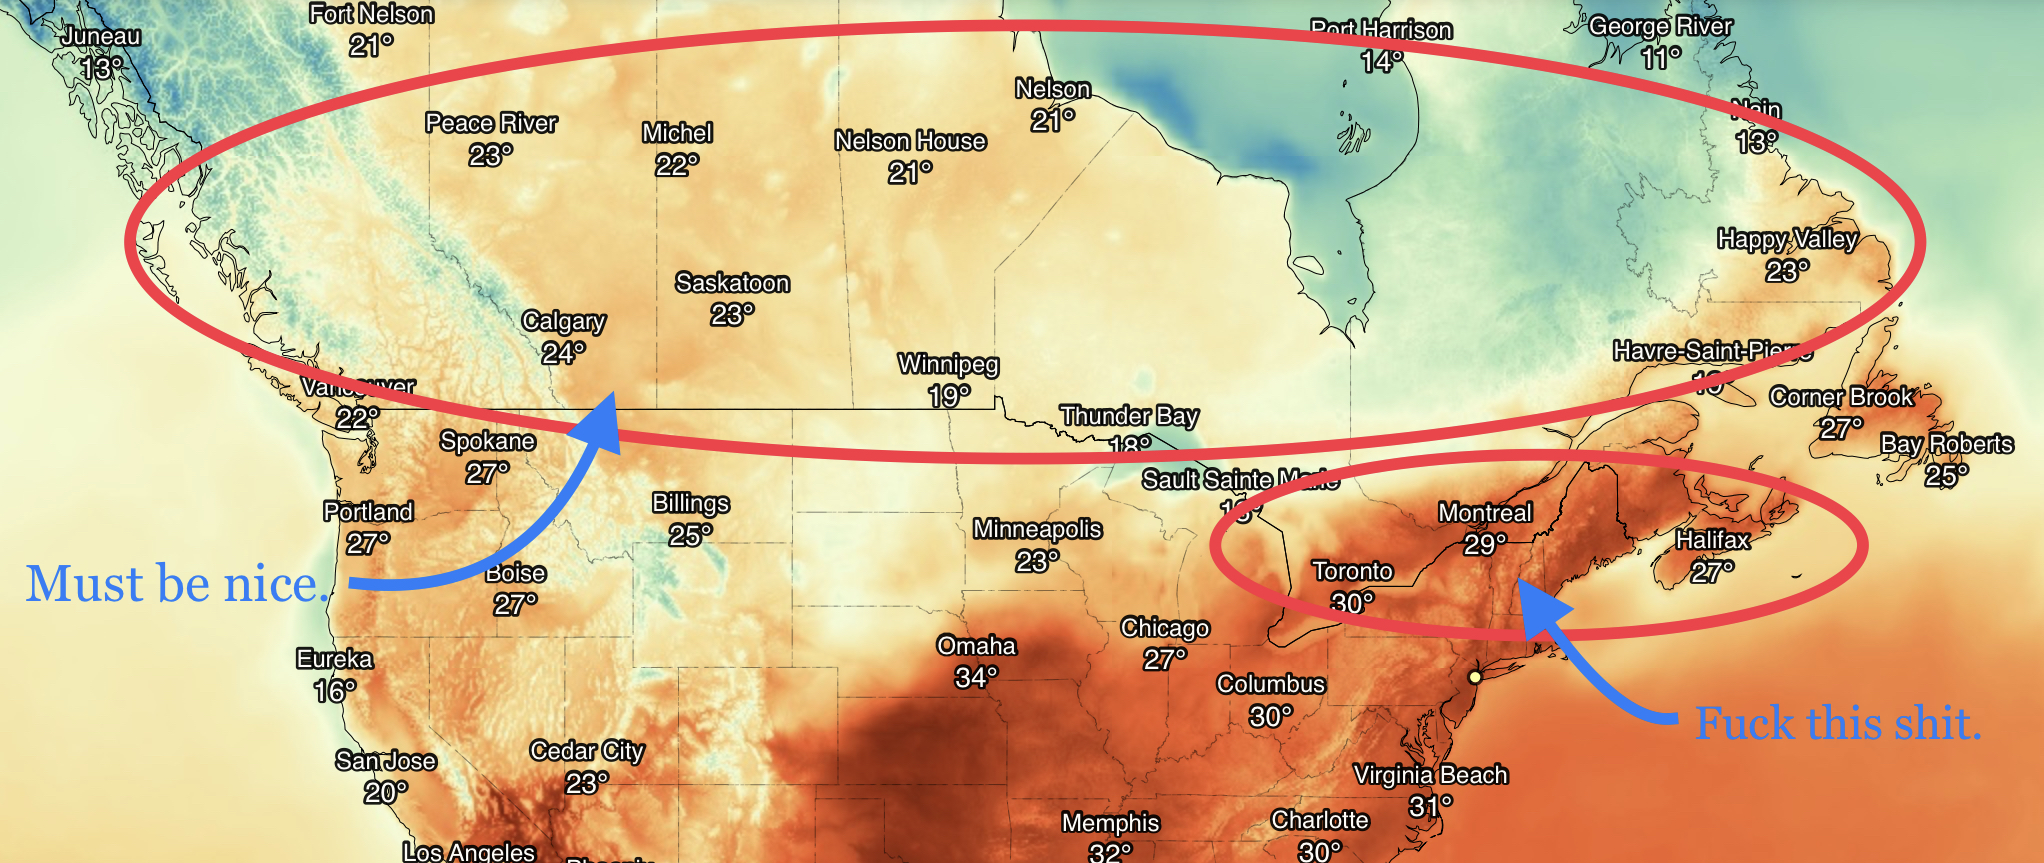 Temperature map showing Southern Ontario, Southern Quebec, New Brunswick, and Nova Scotia suffering in summer heat. The rest of Canada is enjoying tolerable temperatures, and I'm left questioning my life choices living here.